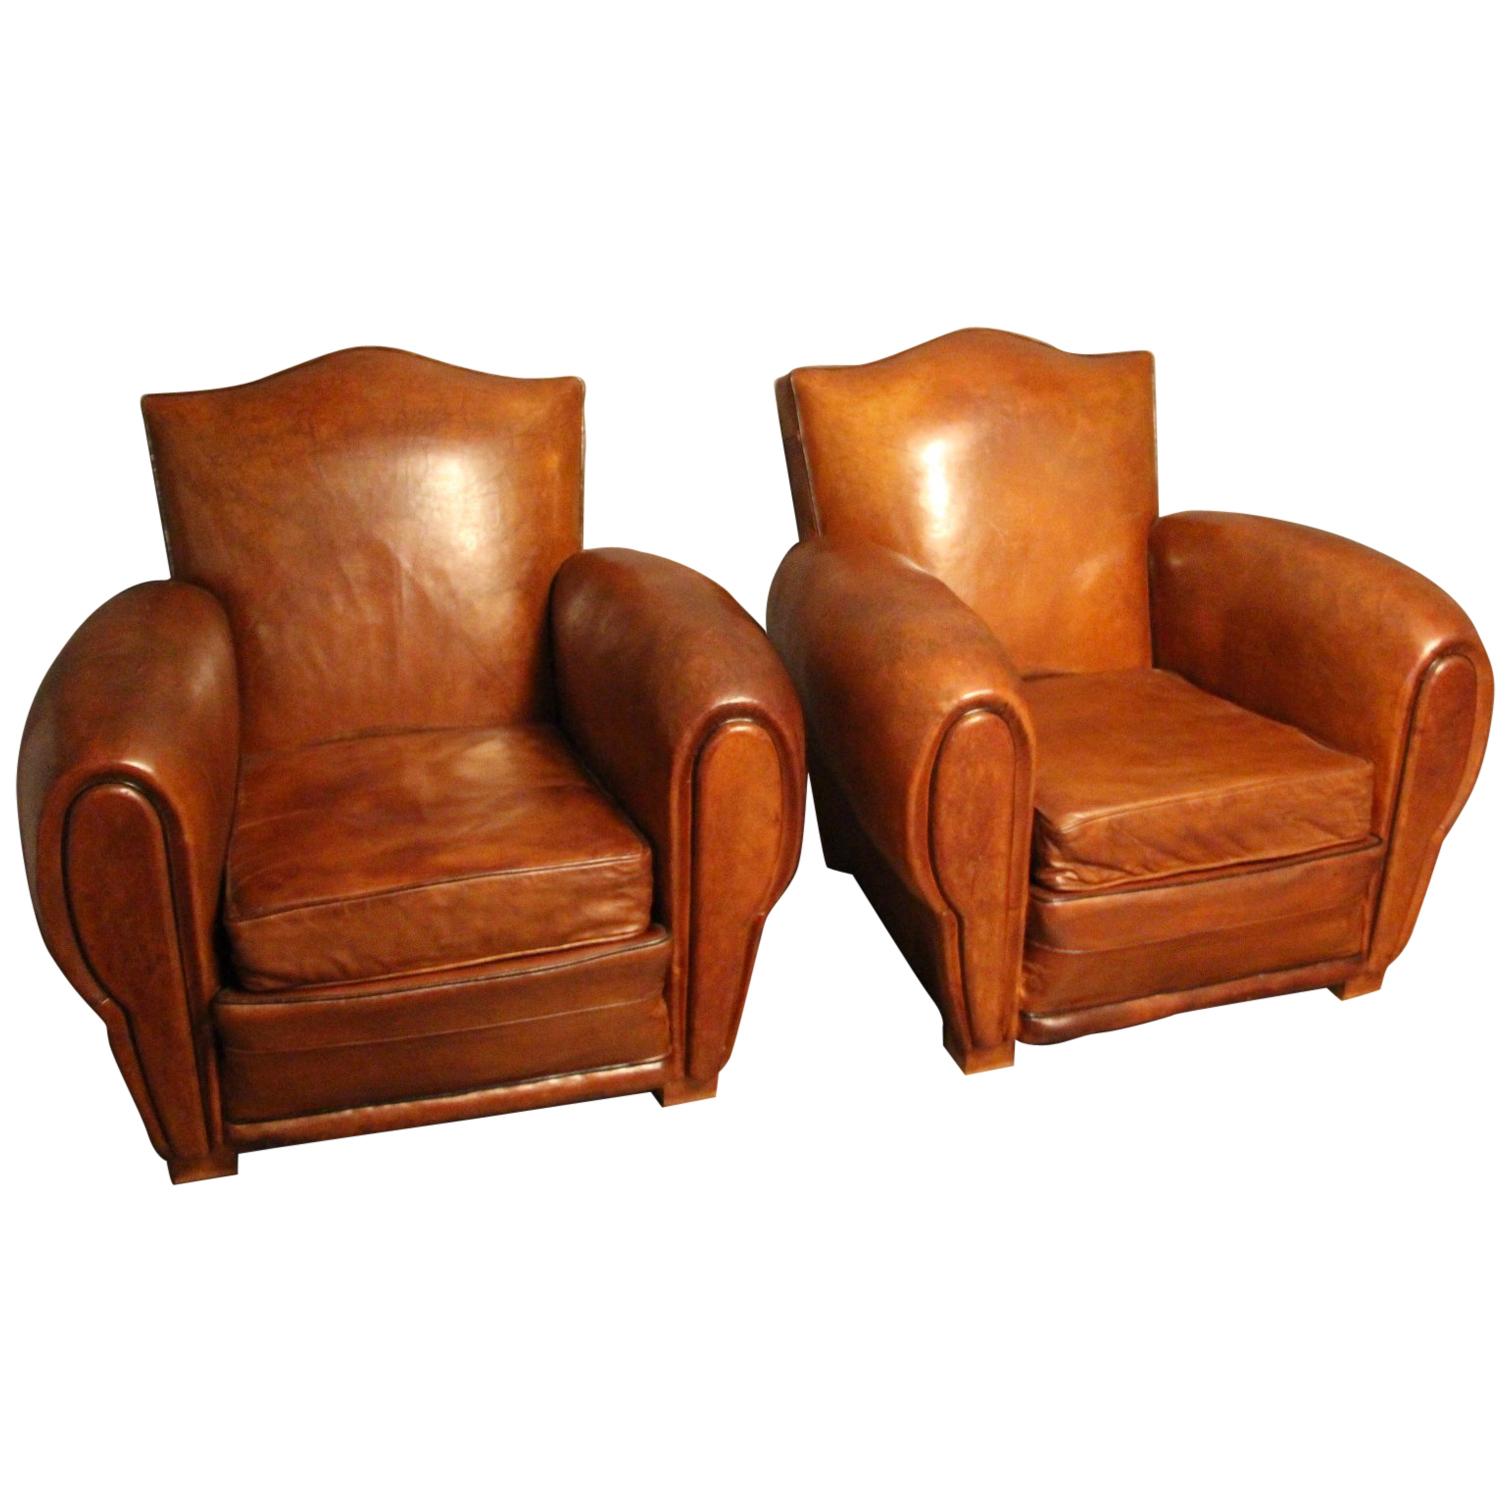 Pair of 1930s French Leather Club Chairs, Moustache Back